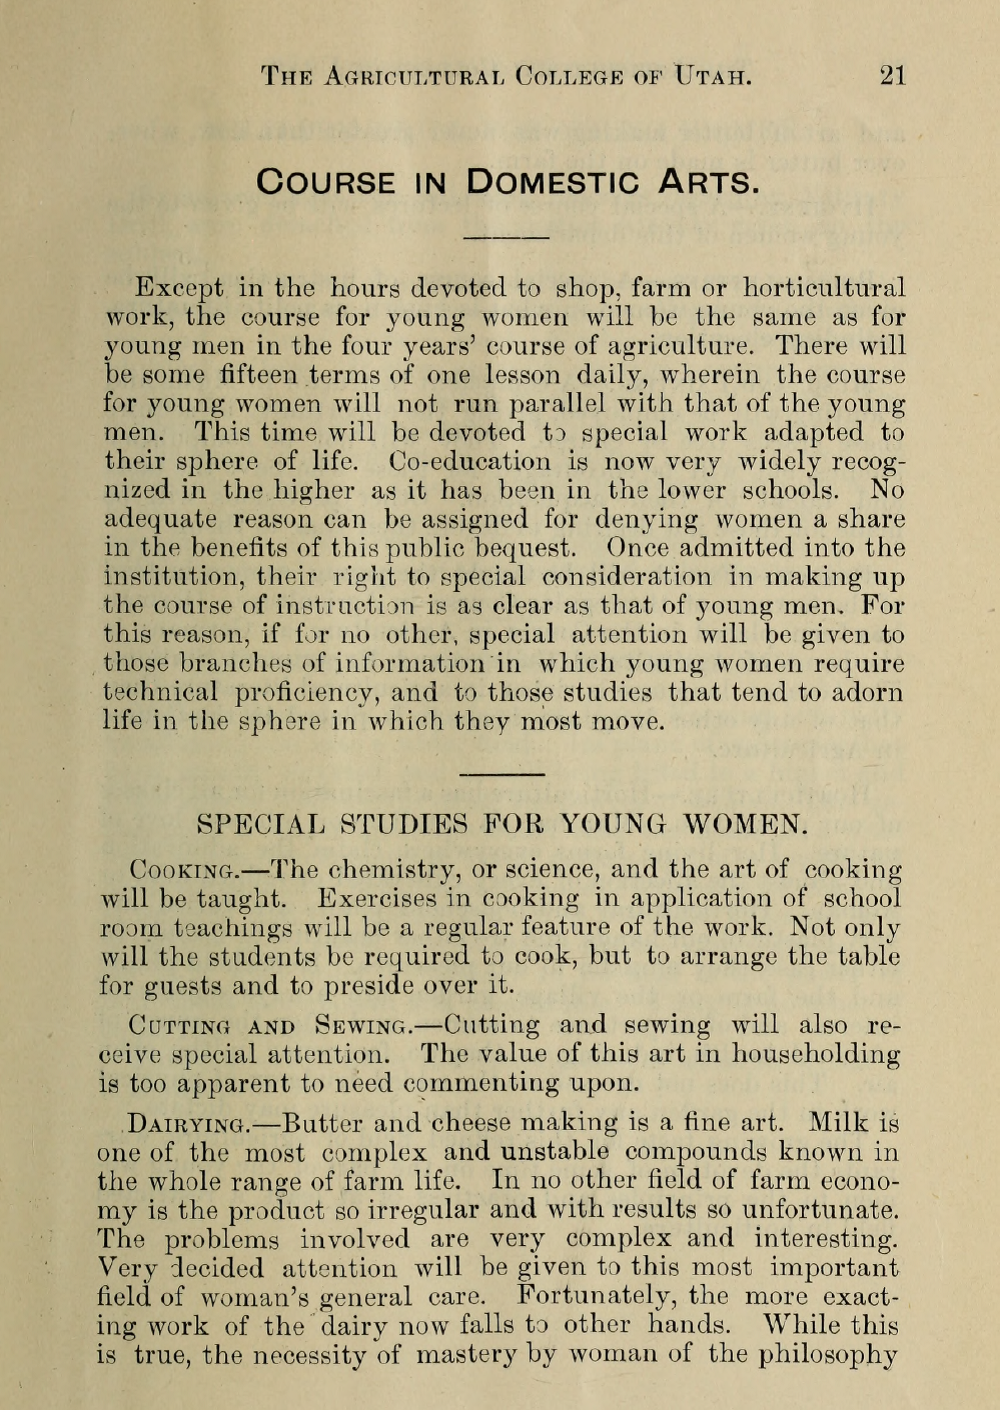 The first of a two-paged excerpt from the Agricultural College of Utah coursebook that outlines classes for young women studying Domestic Arts. 